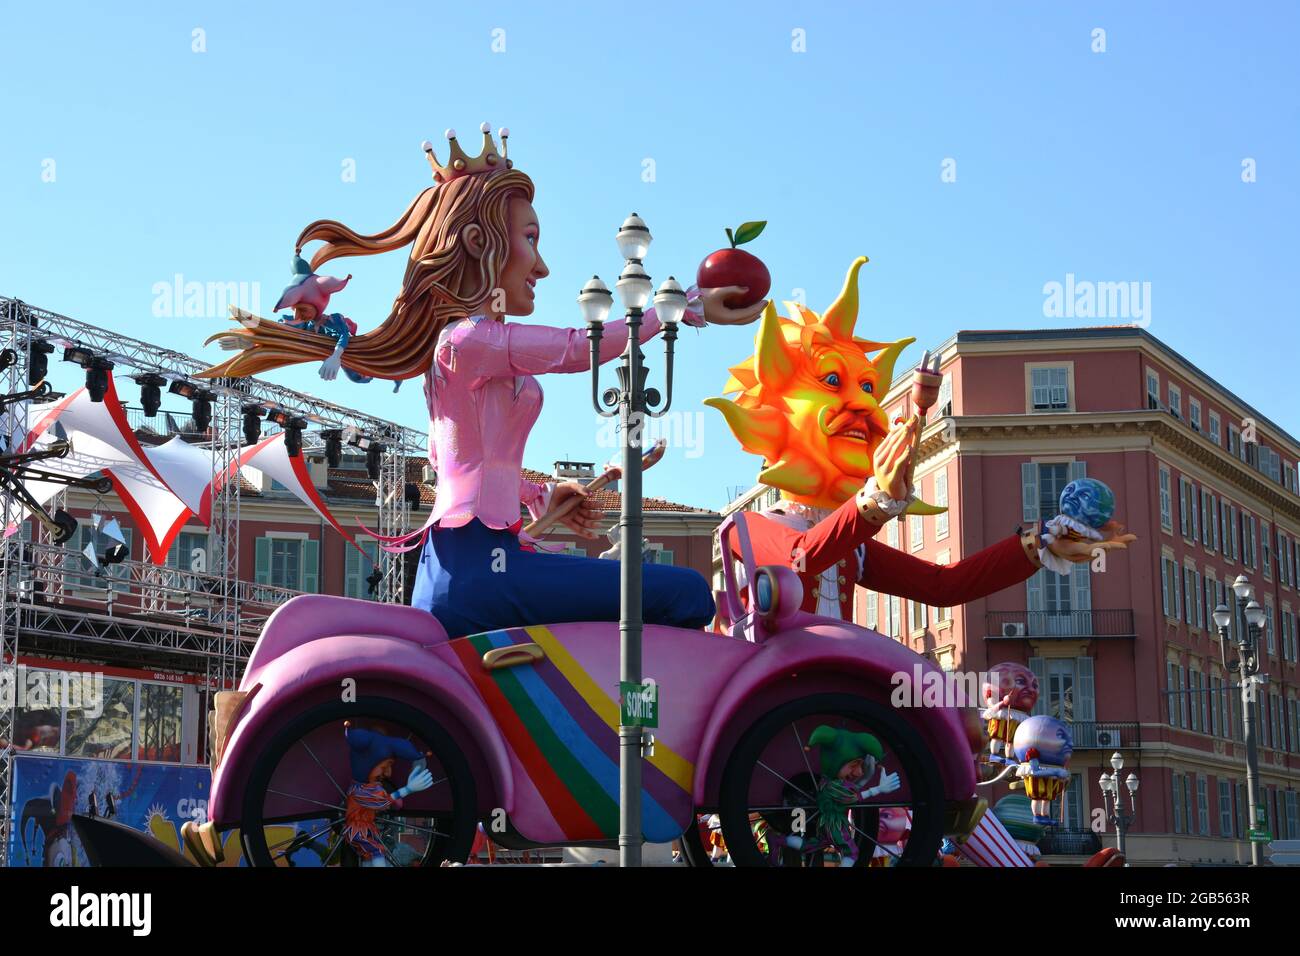 Europe, France, french riviera, Nice city, the famous floats of King and Queen of carnival  placed on the theme of energy. Stock Photo